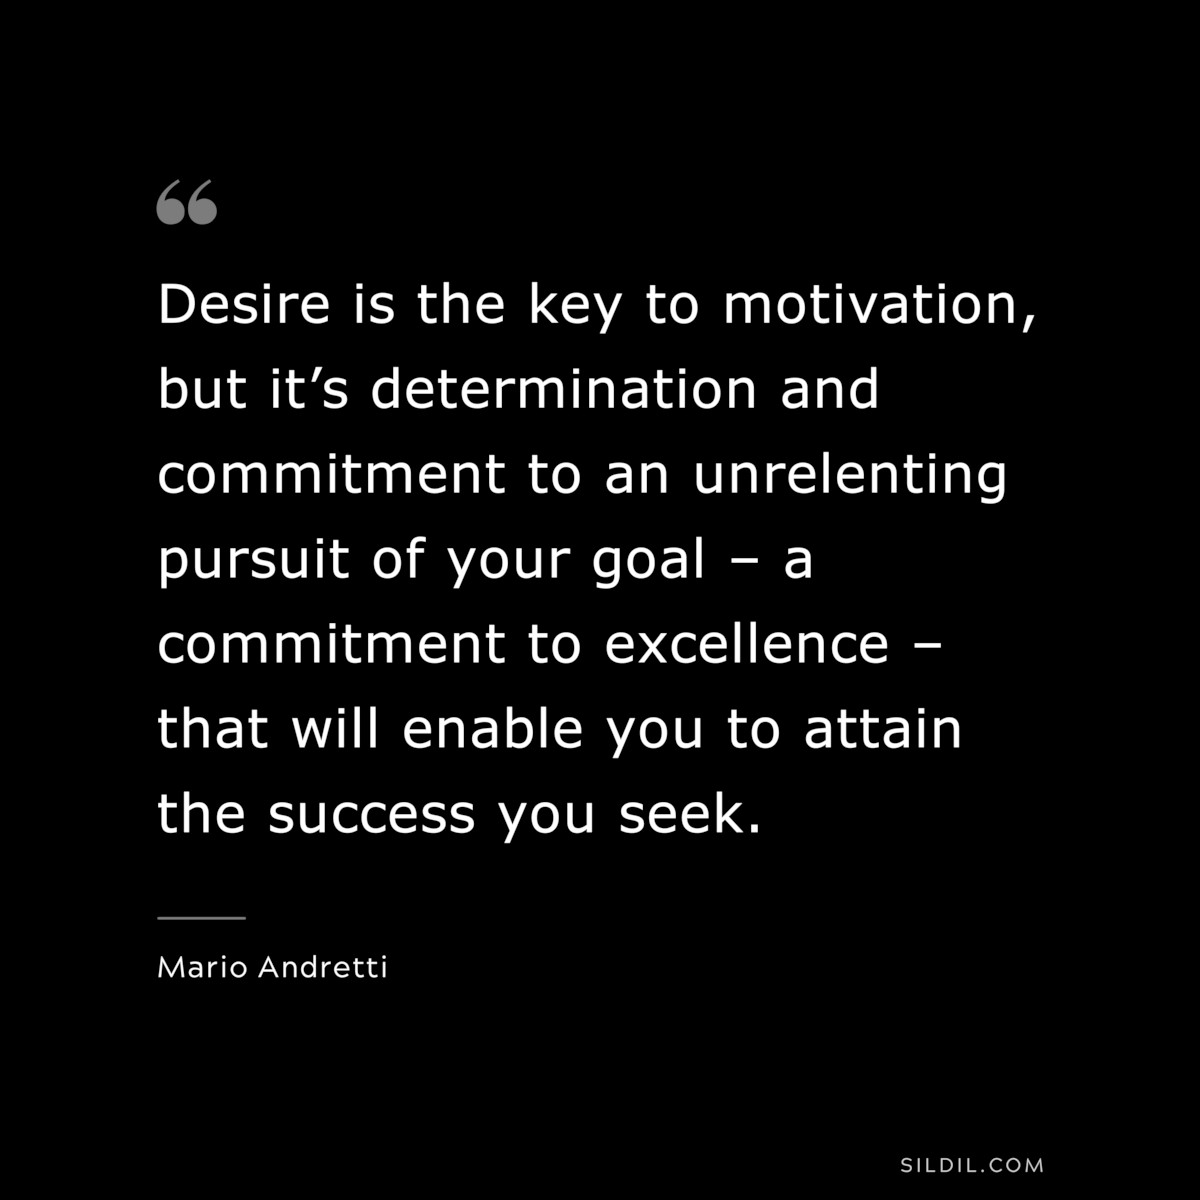 Desire is the key to motivation, but it’s determination and commitment to an unrelenting pursuit of your goal – a commitment to excellence – that will enable you to attain the success you seek. ― Mario Andretti